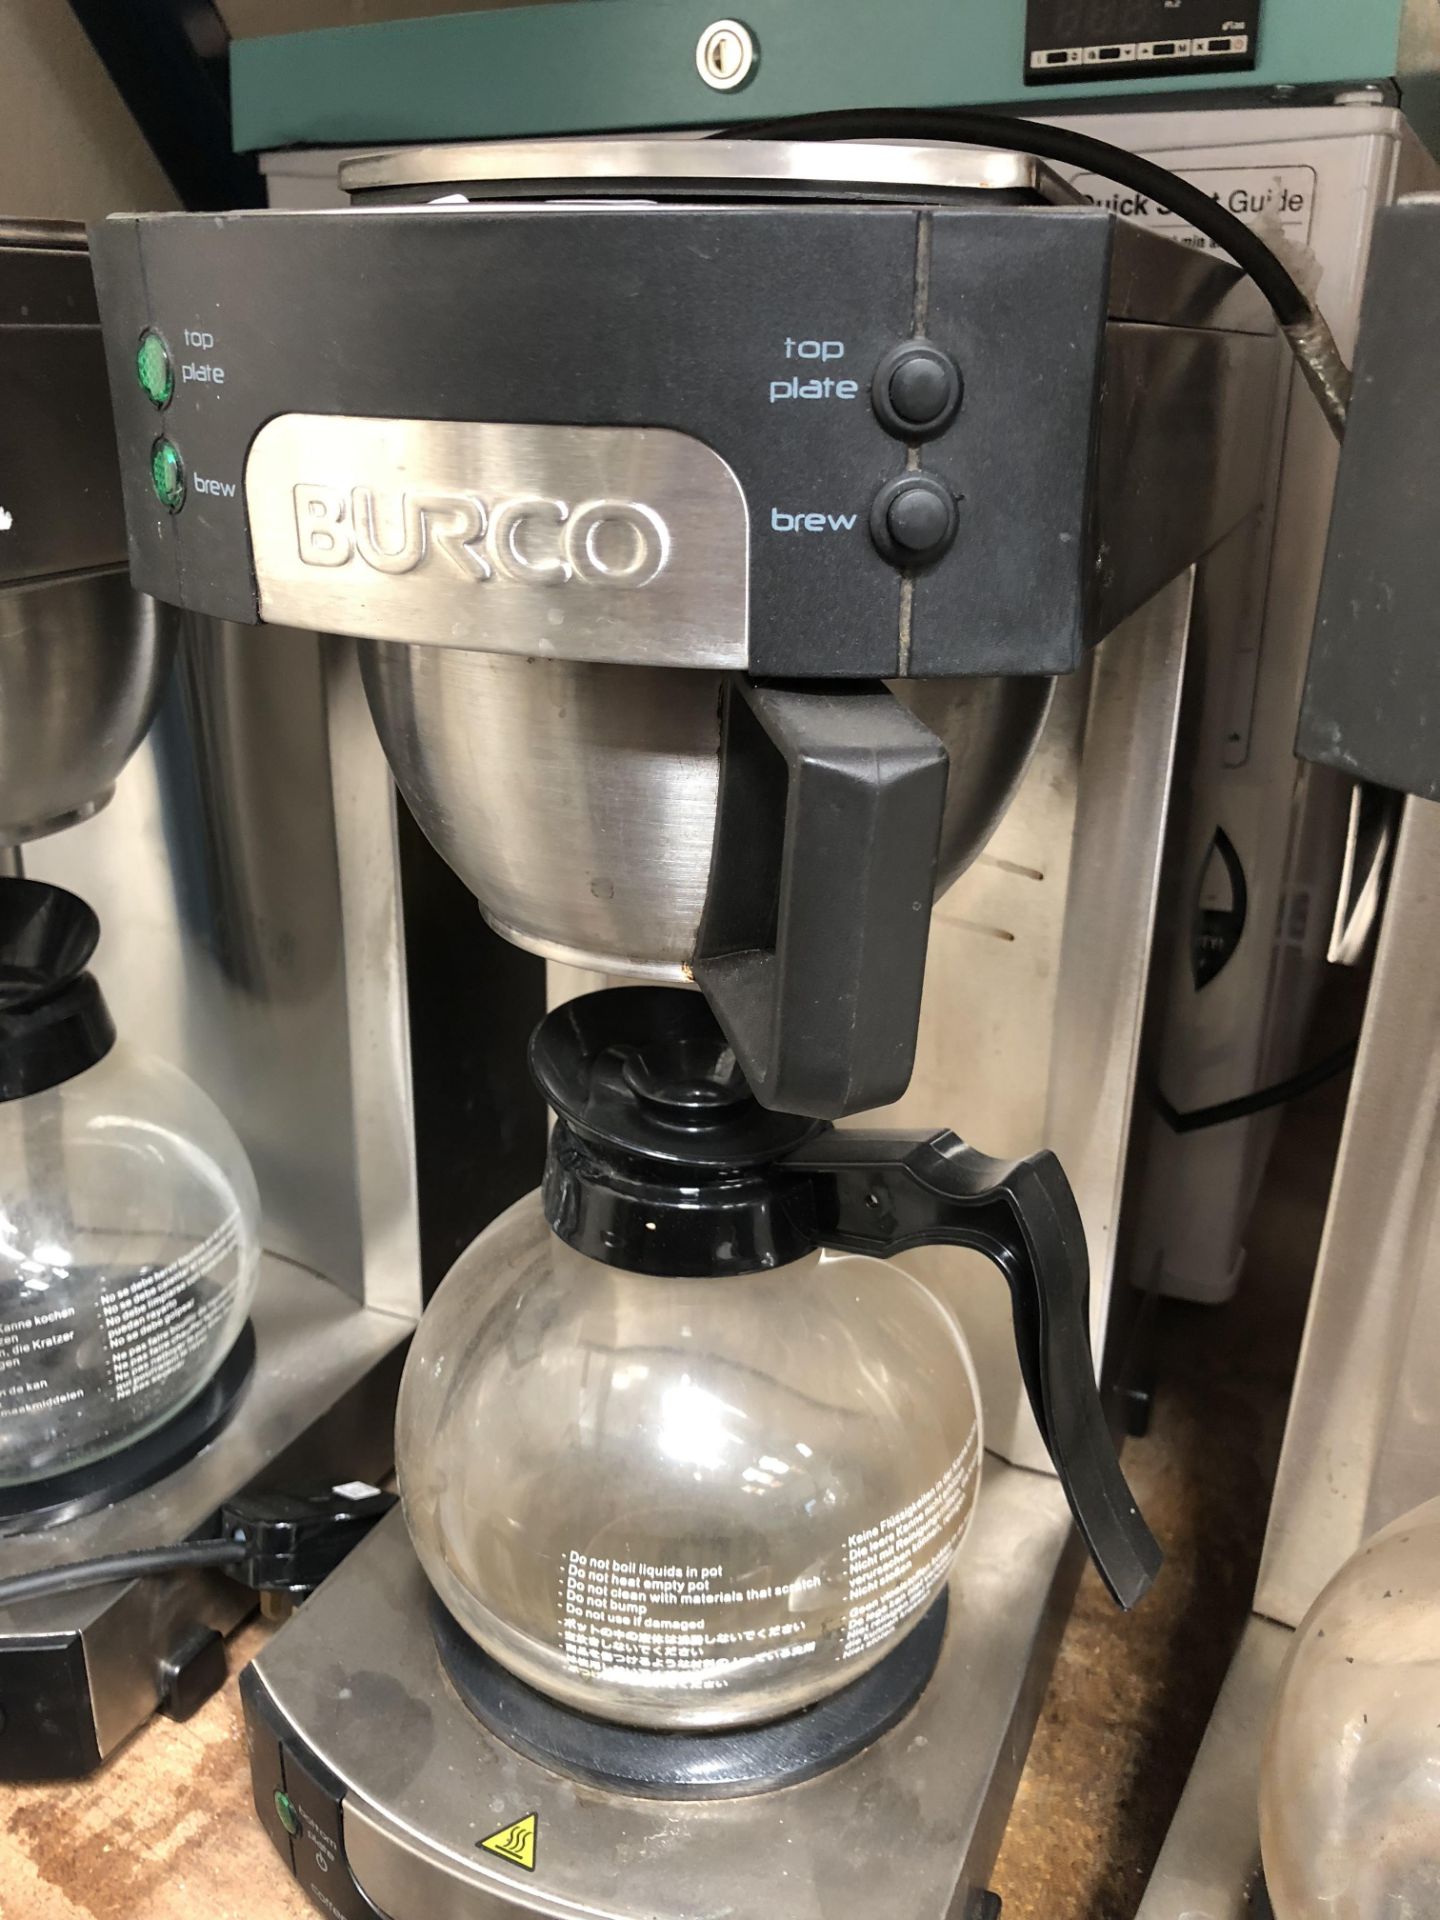 Burco Hot Coffee Brewer with 2 Heat pads and 1 Jug